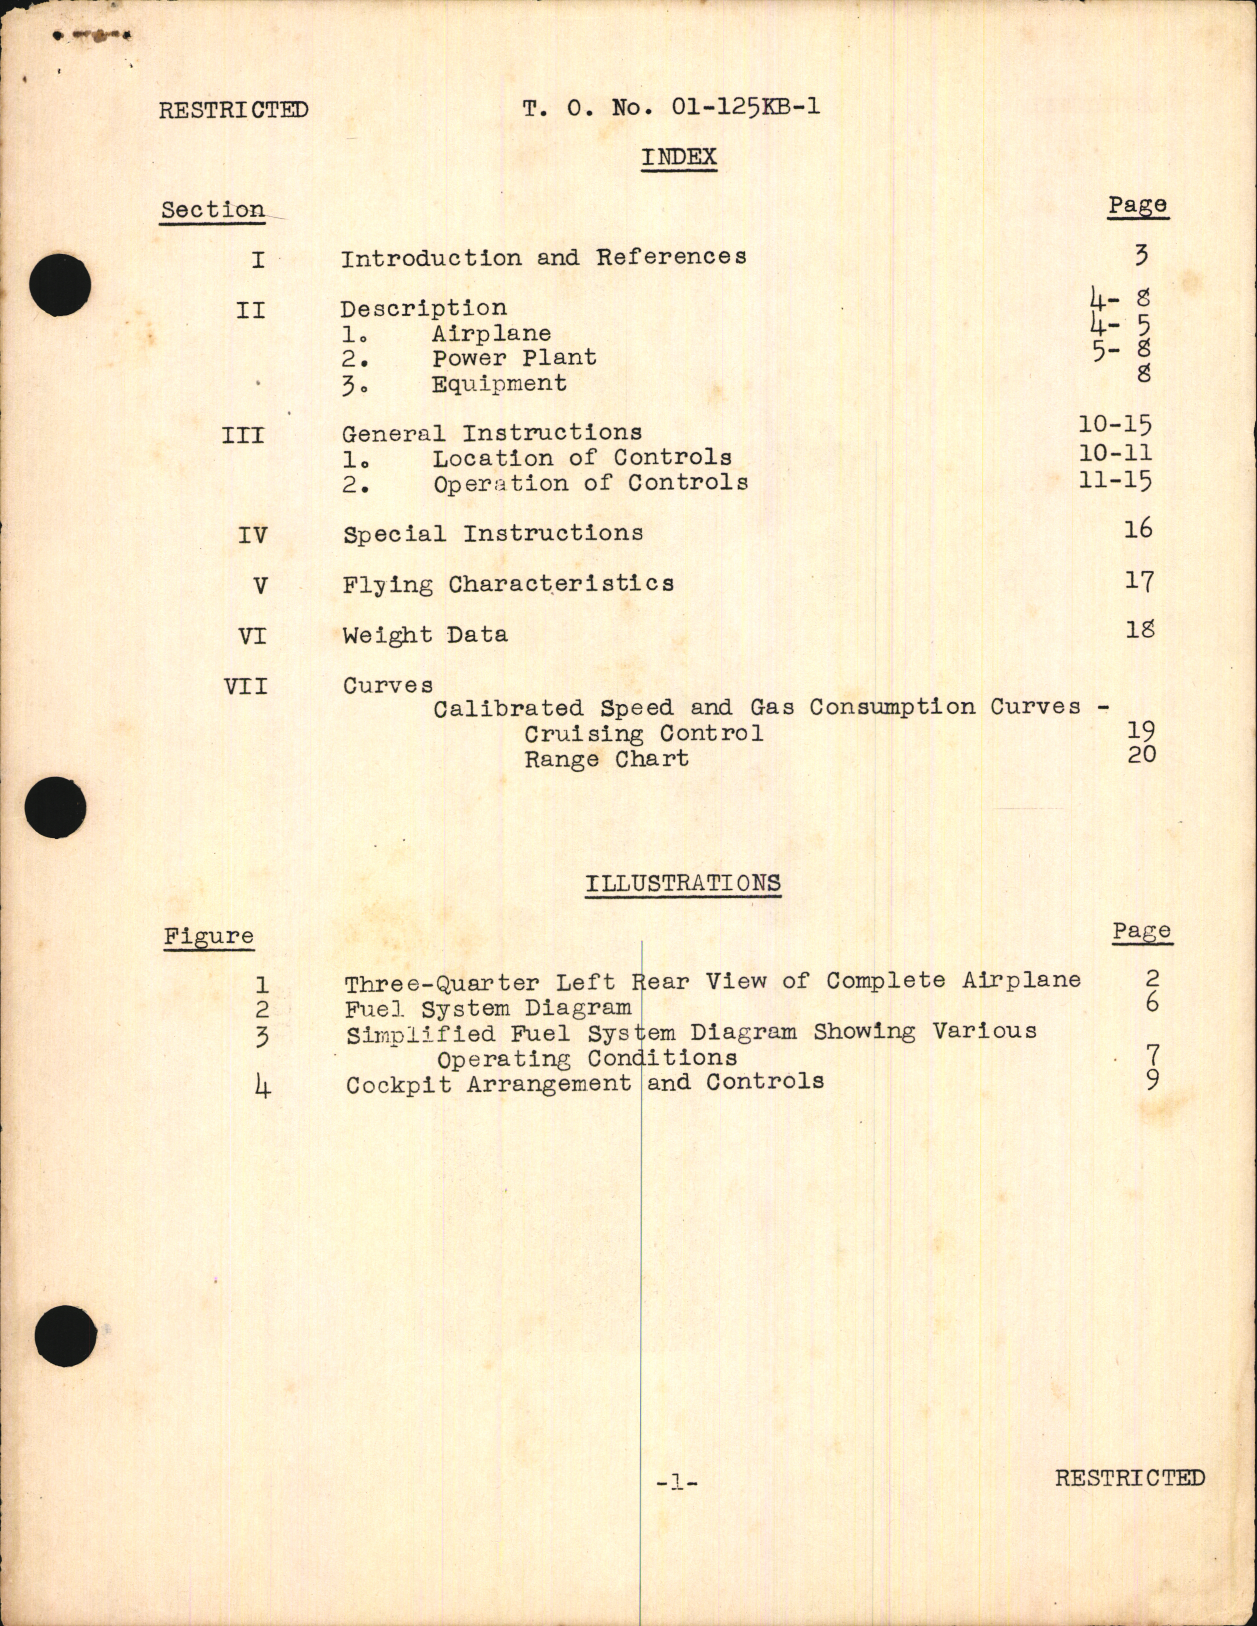 Sample page 5 from AirCorps Library document: Operation and Flight Instructions for Model AT-17 Advanced Training Airplane